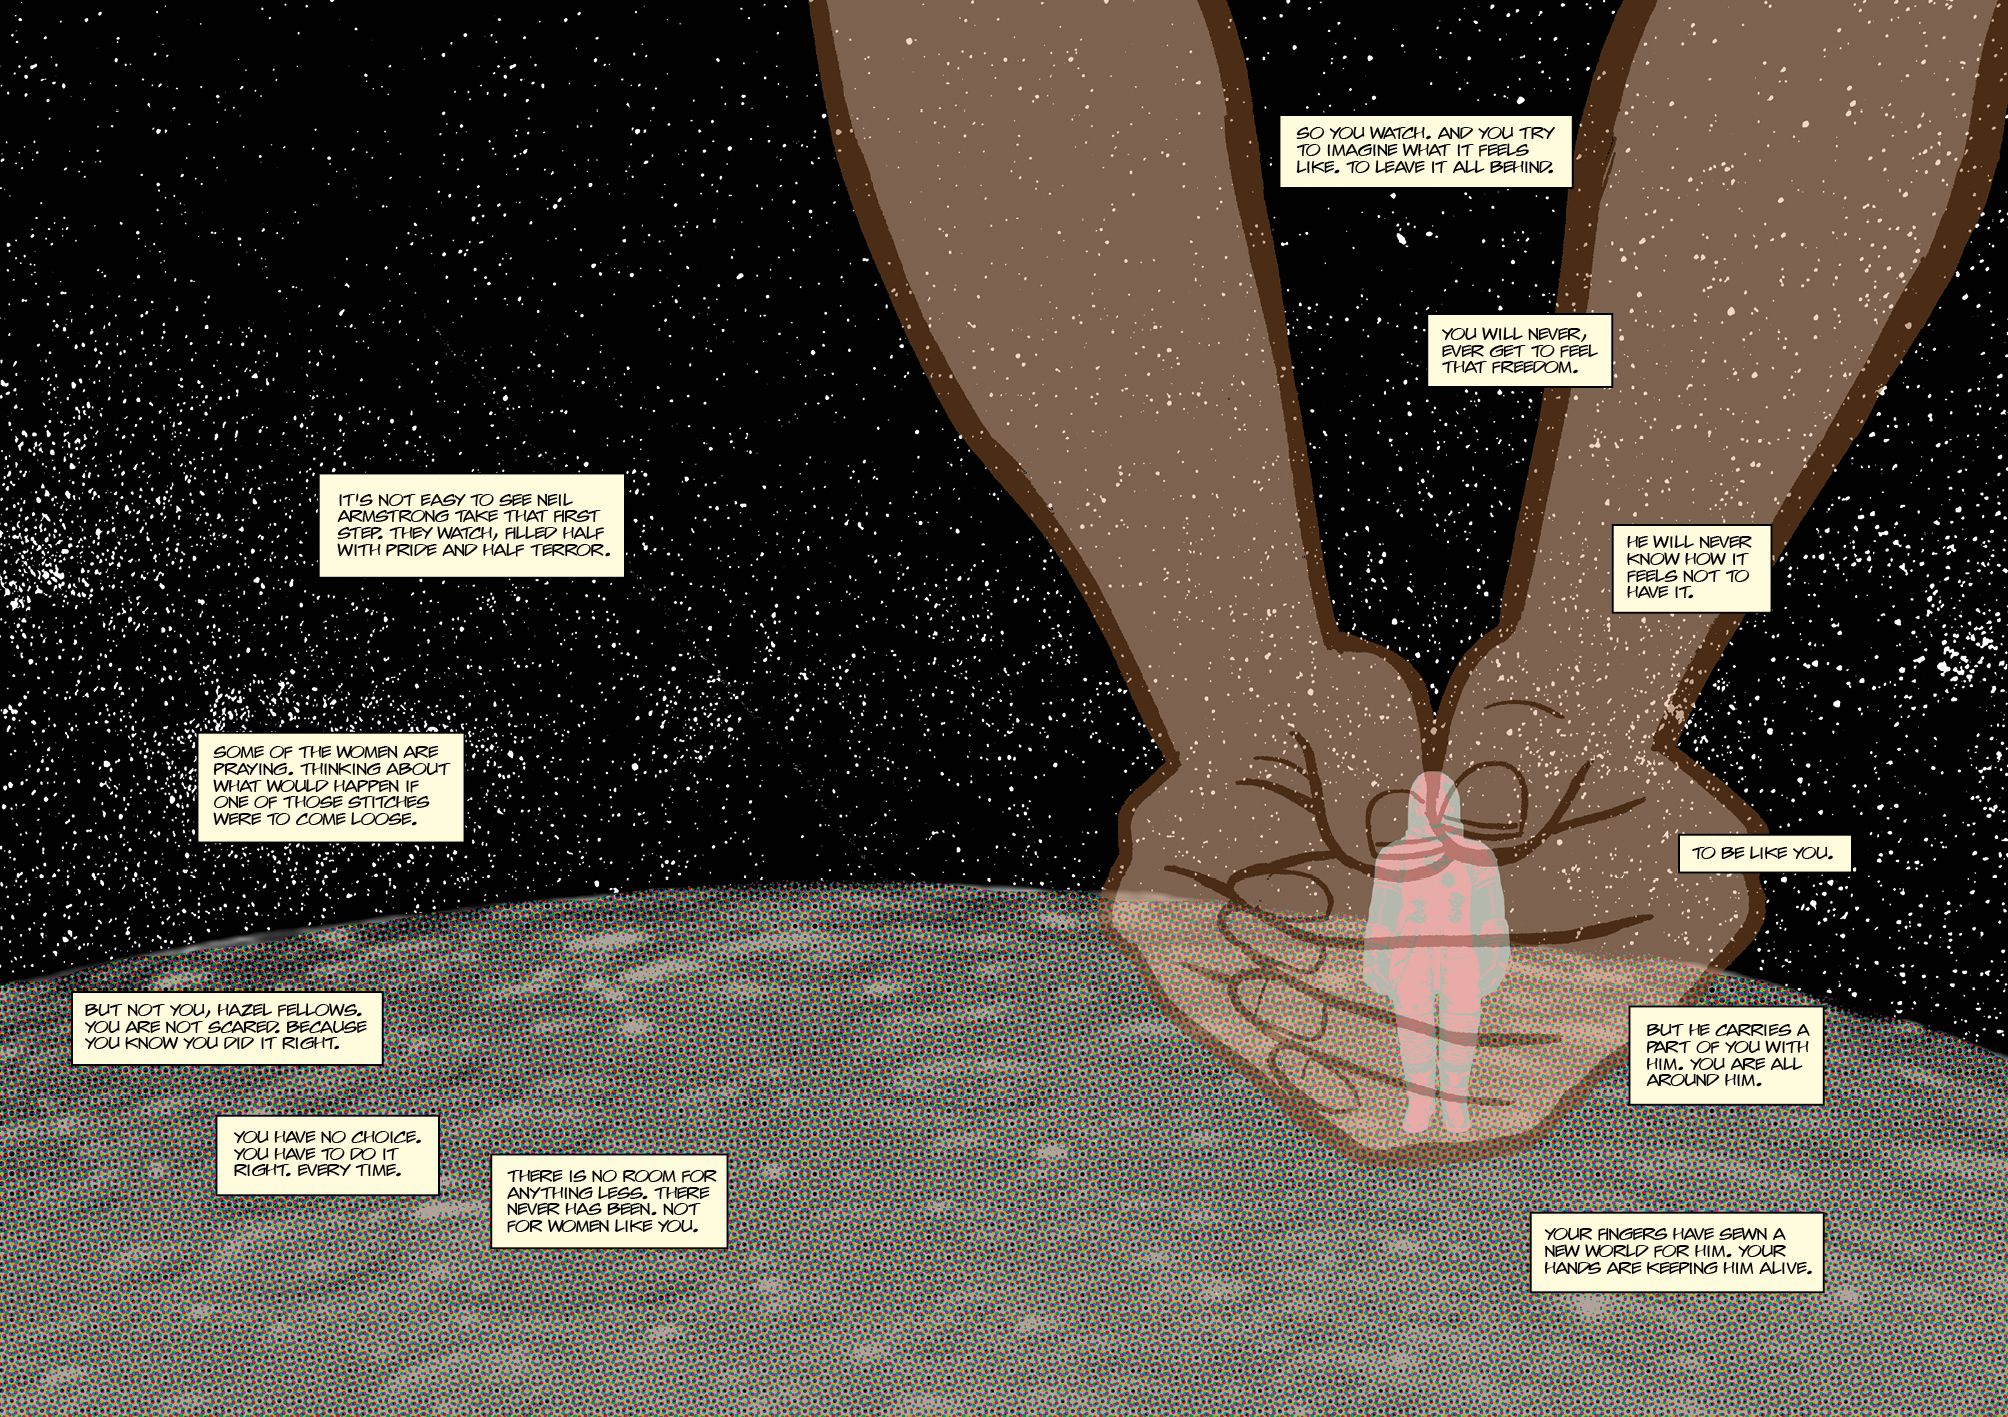 An illustration of two giant hands holding a person who appears to be in a lunar landscape. Text boxes surround the character. They read: "You will never get to feel that freedom / He will never know how it feels to have it / To be like you / But he carries a part of you with him. You are all around him / Your fingers have sewn a new world for him. Your hands are keeping him alive.